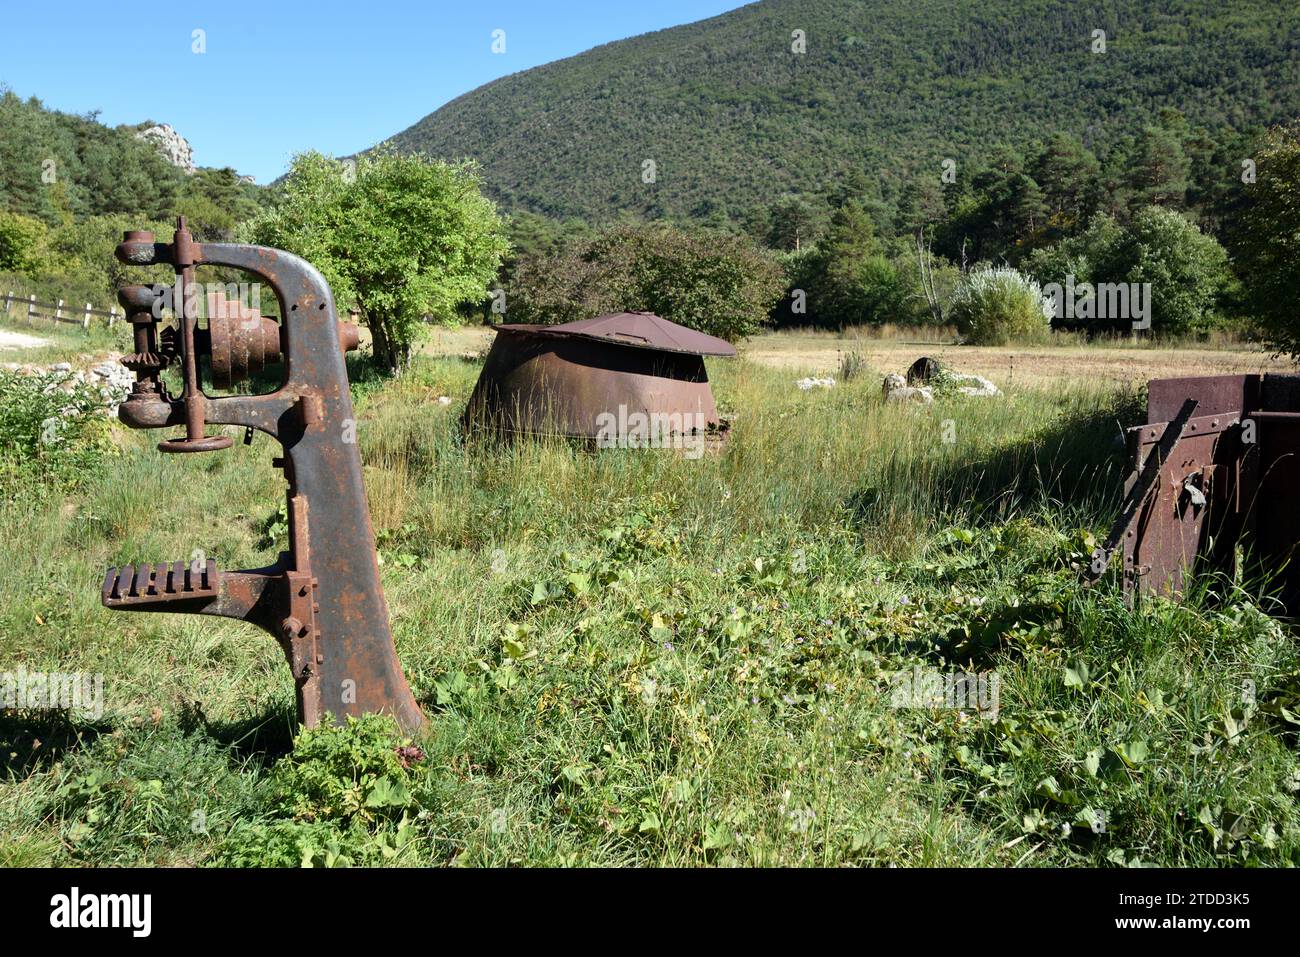 Vintage or Old Wood Clamp for holding logs or tree trunks & Rusty Cauldron in Derelict & Abandoned Sawmill at La Martre Var Provence France Stock Photo